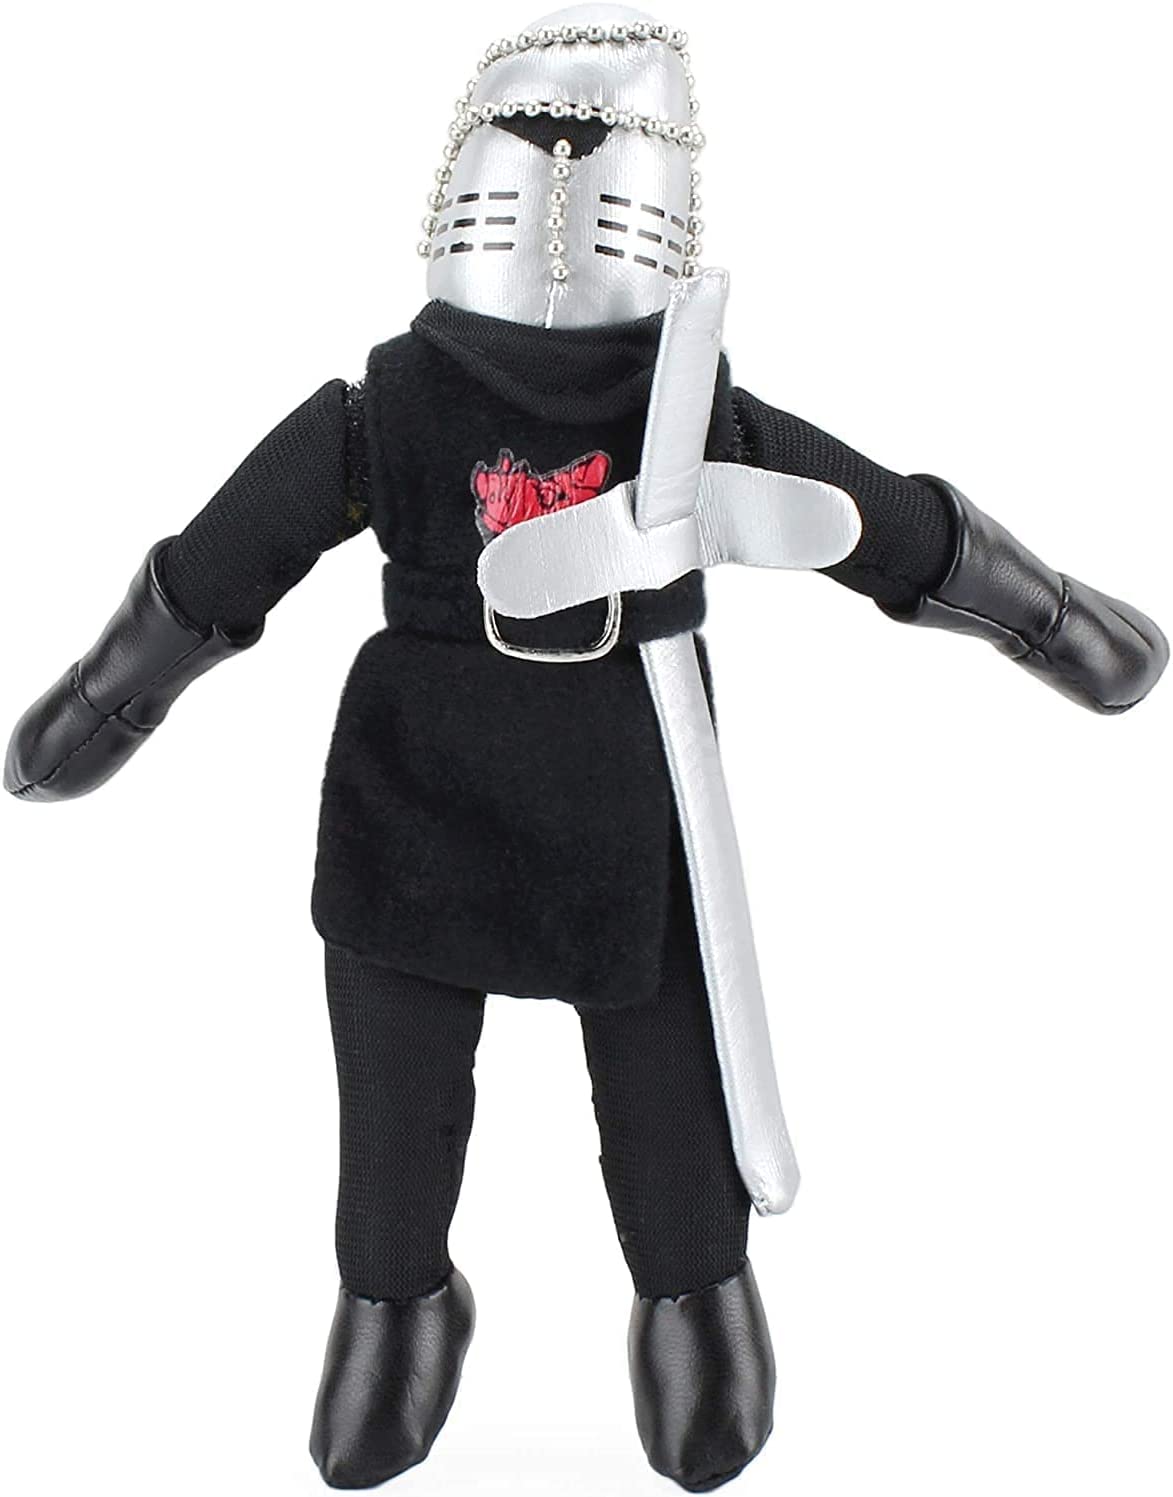 Toy Vault’s Black Knight Plush Mini from Monty Python’s Quest for the Holy Grail